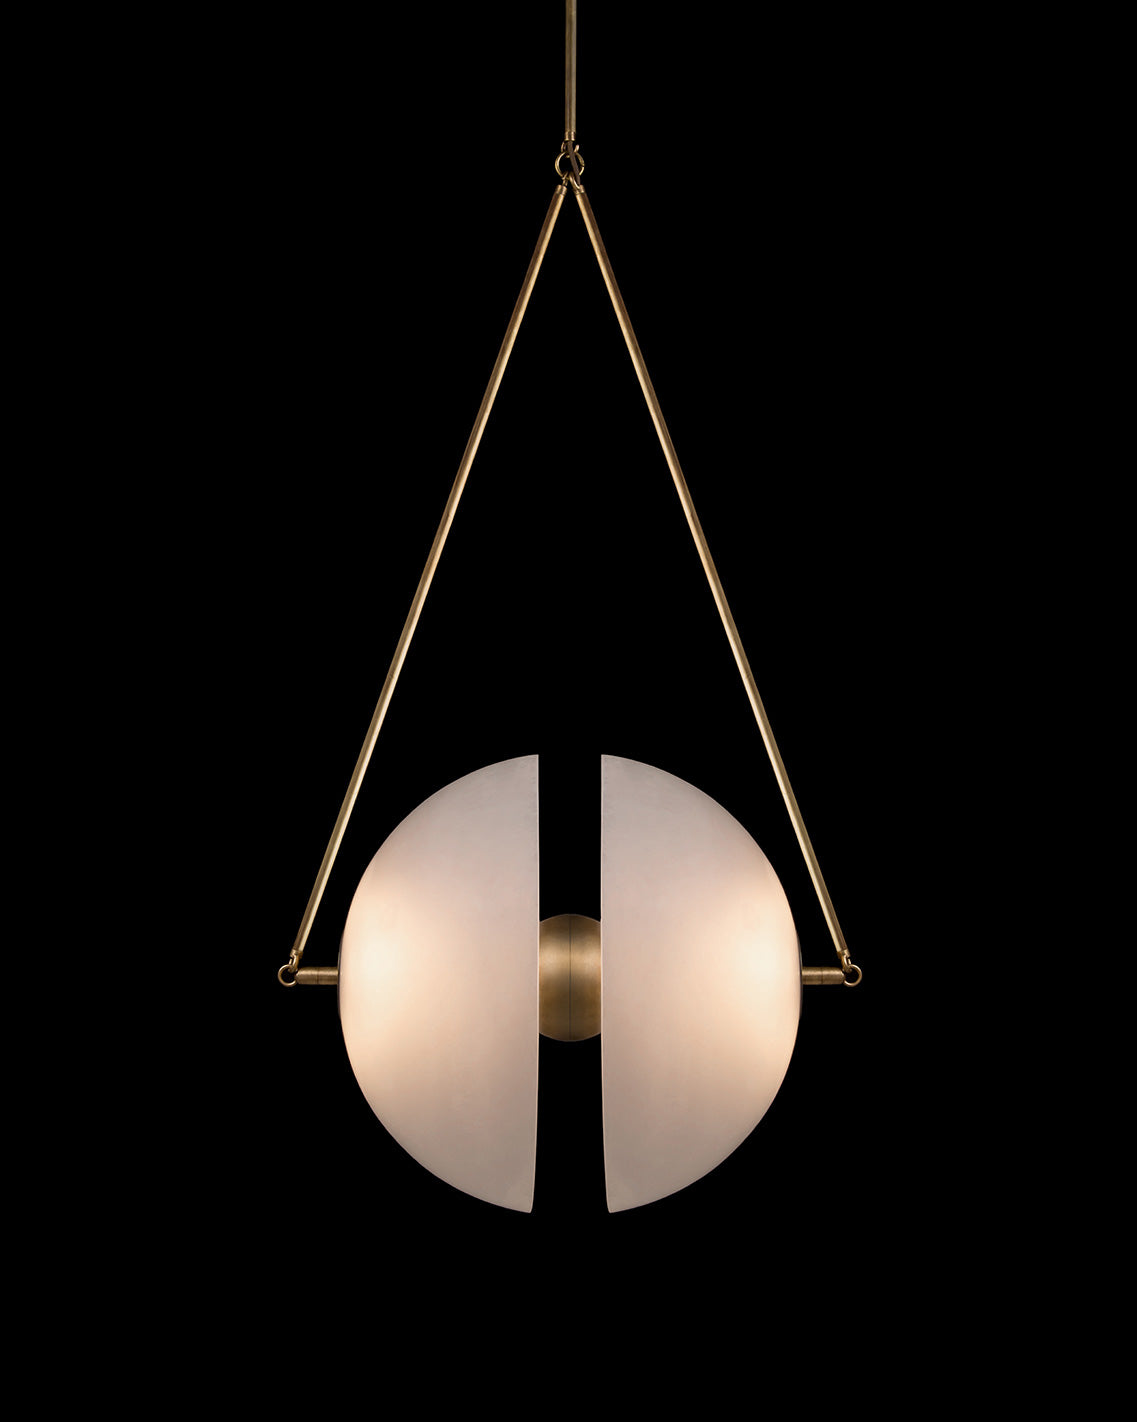 SYNAPSE ceiling pendant in Aged Brass finish, hanging against a black background. 